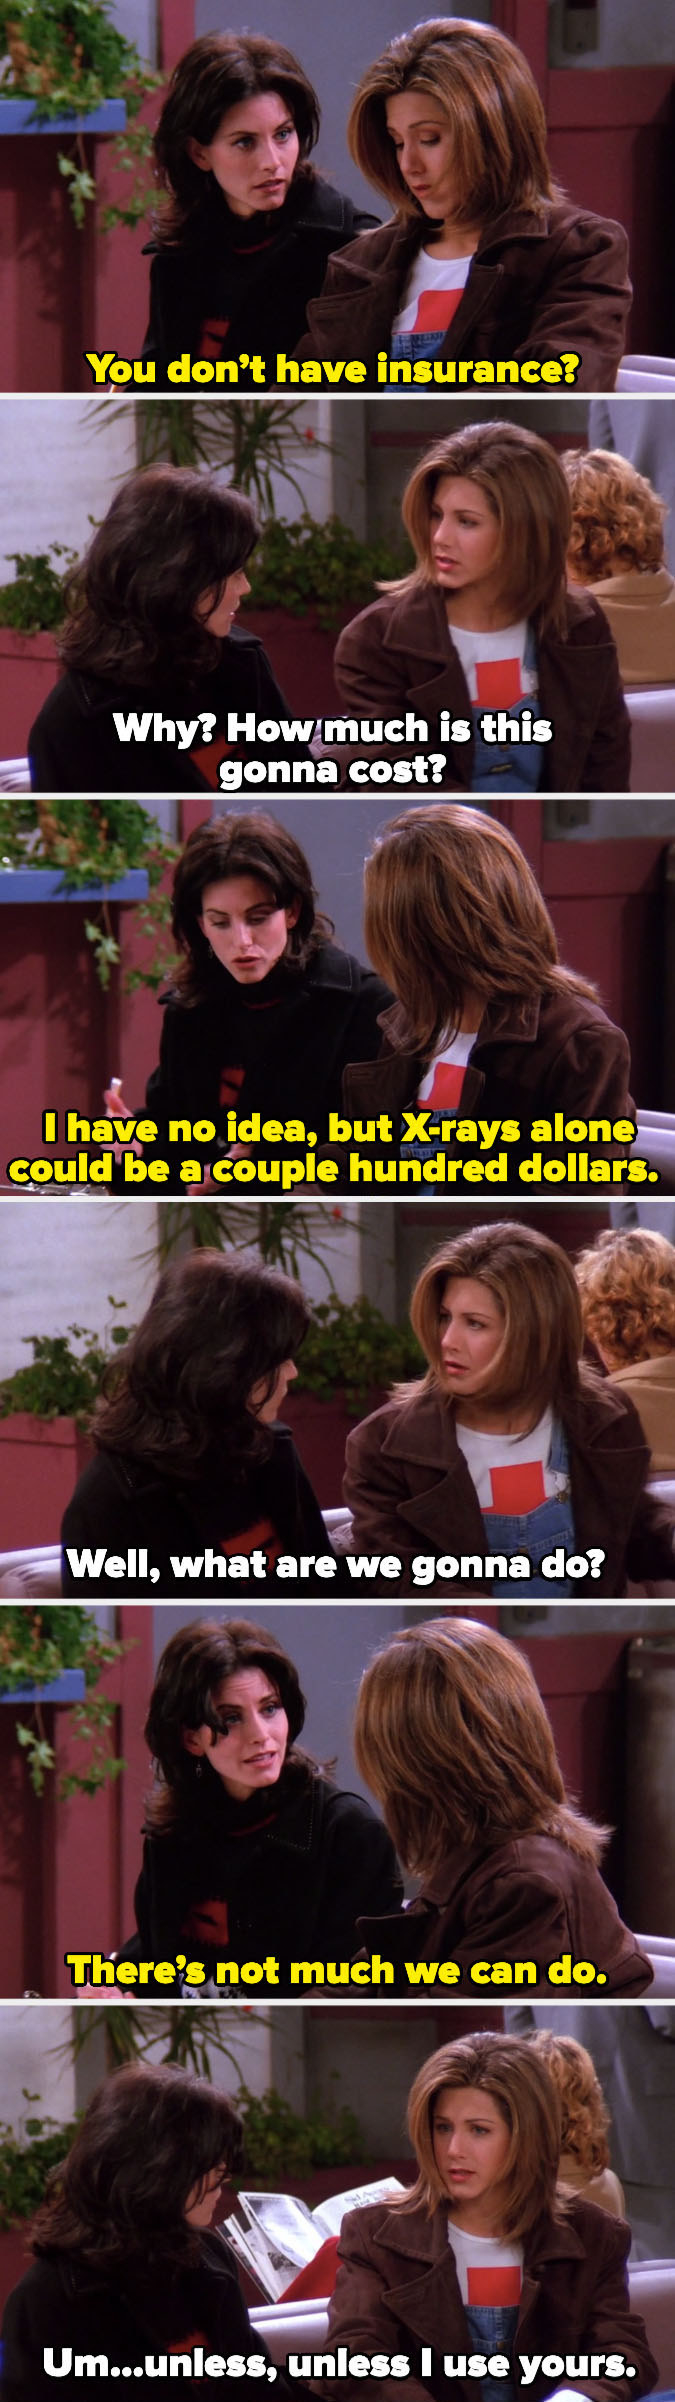 Rachel asking Monica to use her insurance for an X-ray because she doesn&#x27;t have any